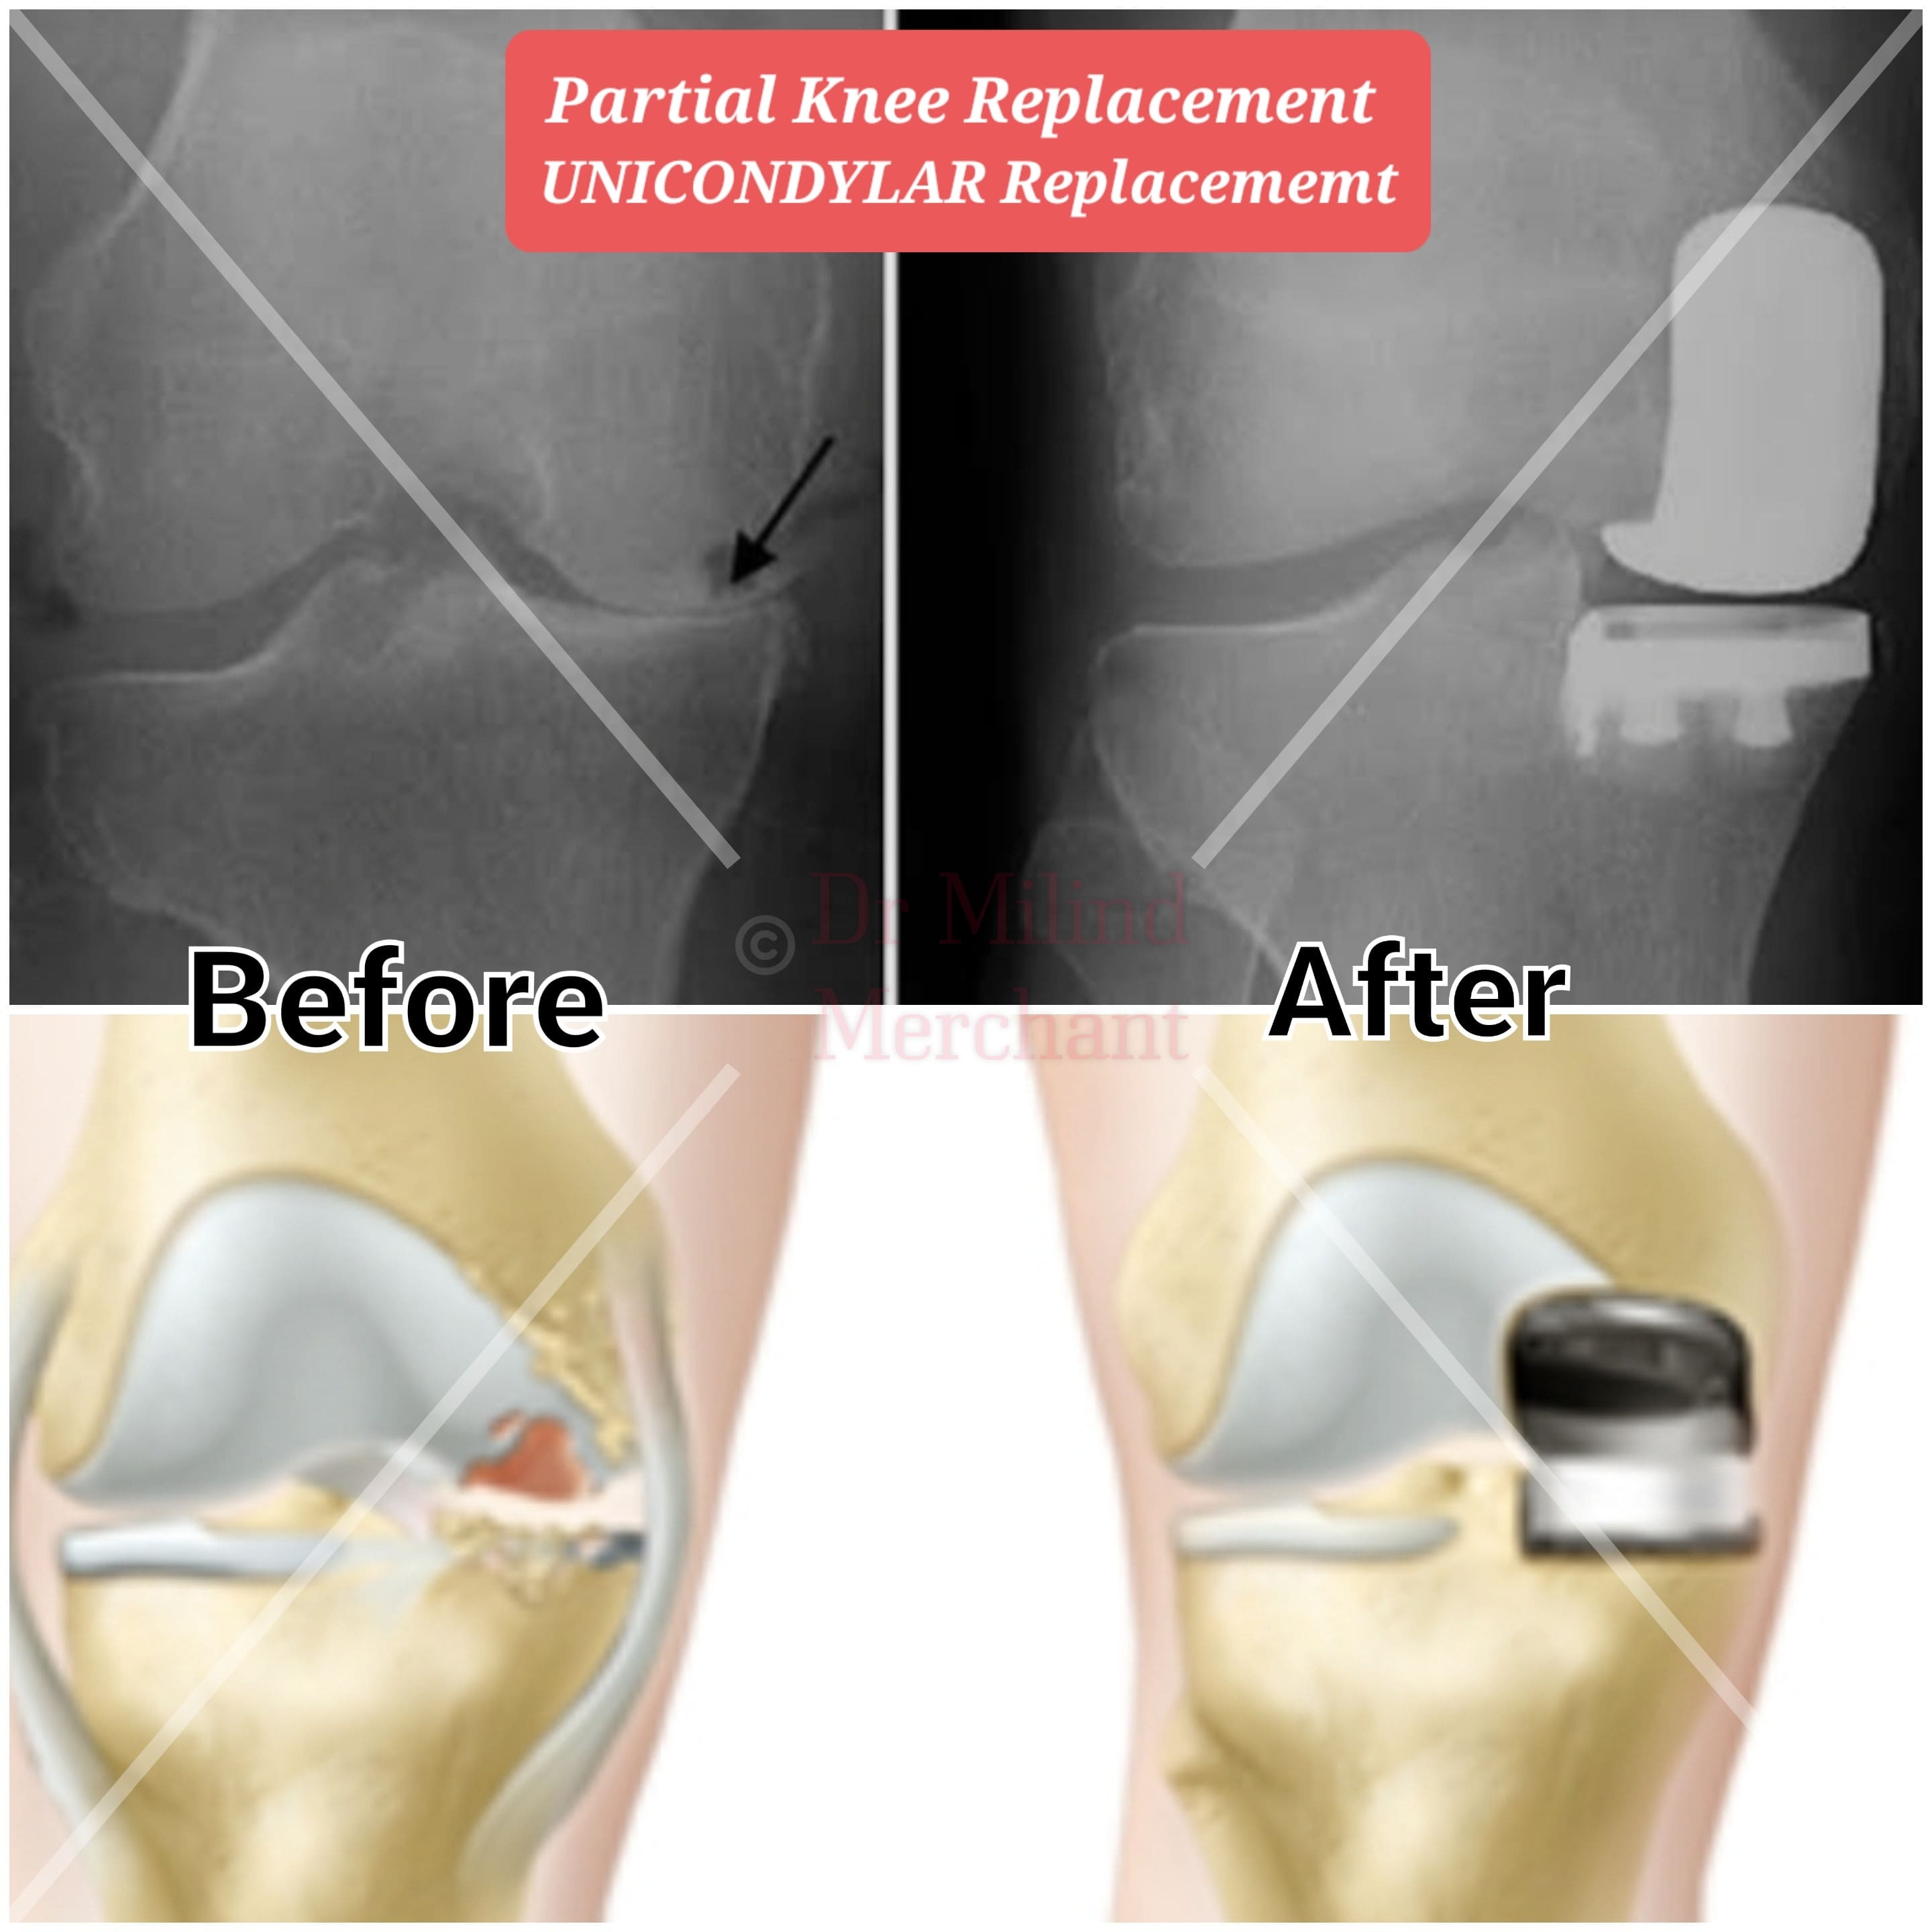 Partial knee replacement